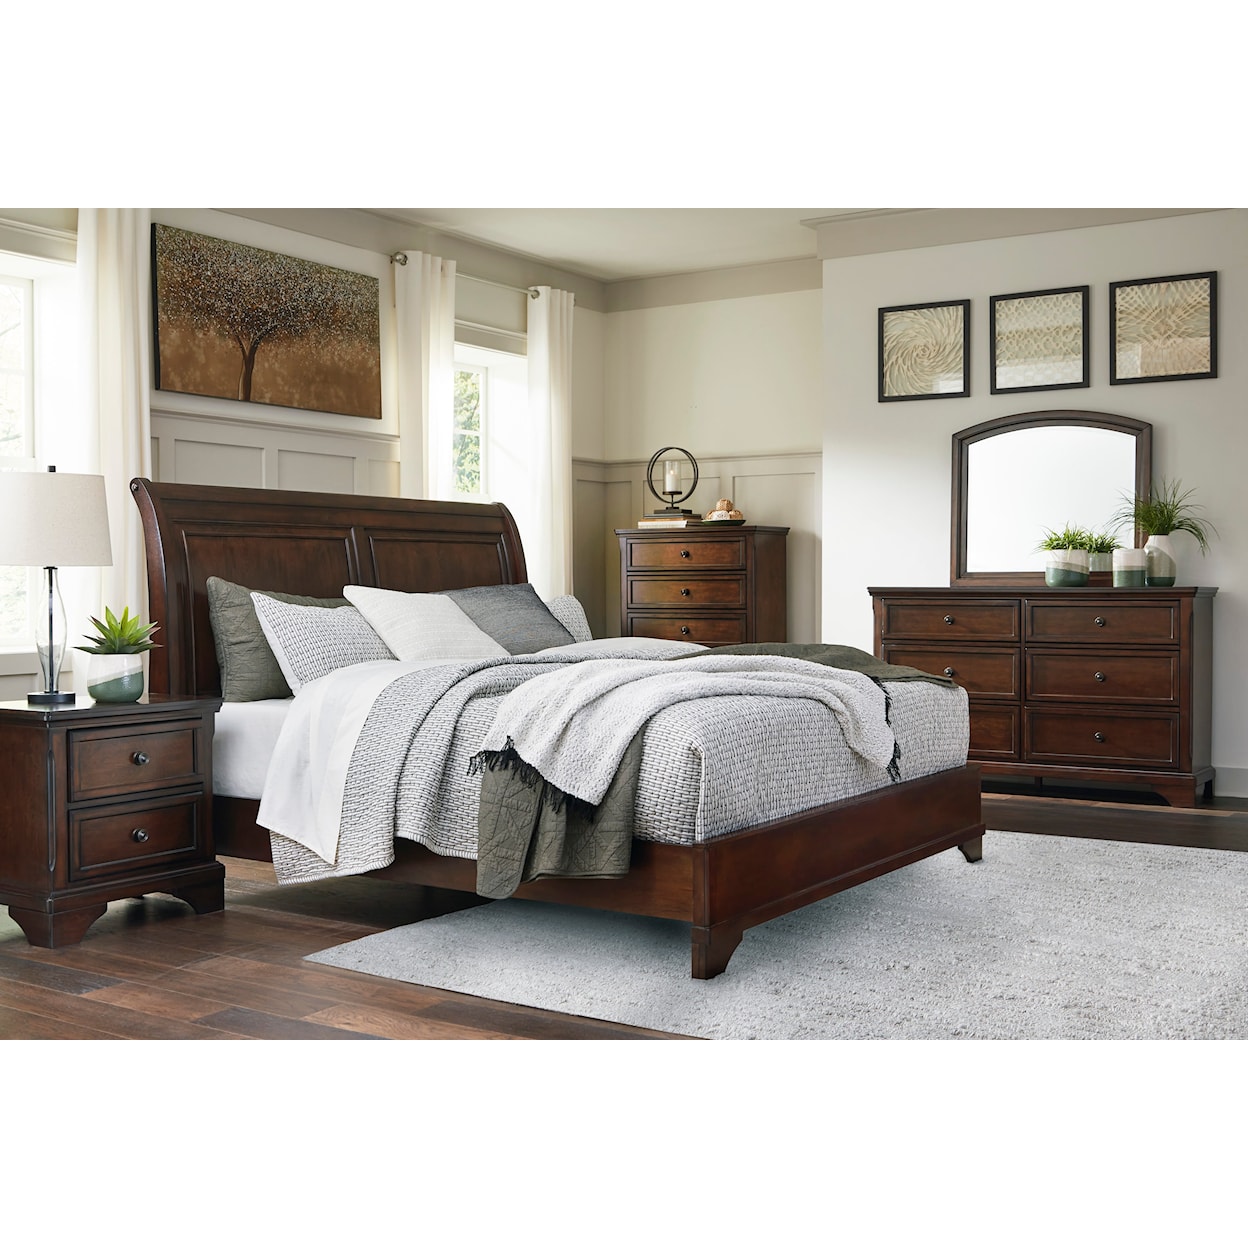 Signature Design by Ashley Furniture Brookbauer Queen Sleigh Bed